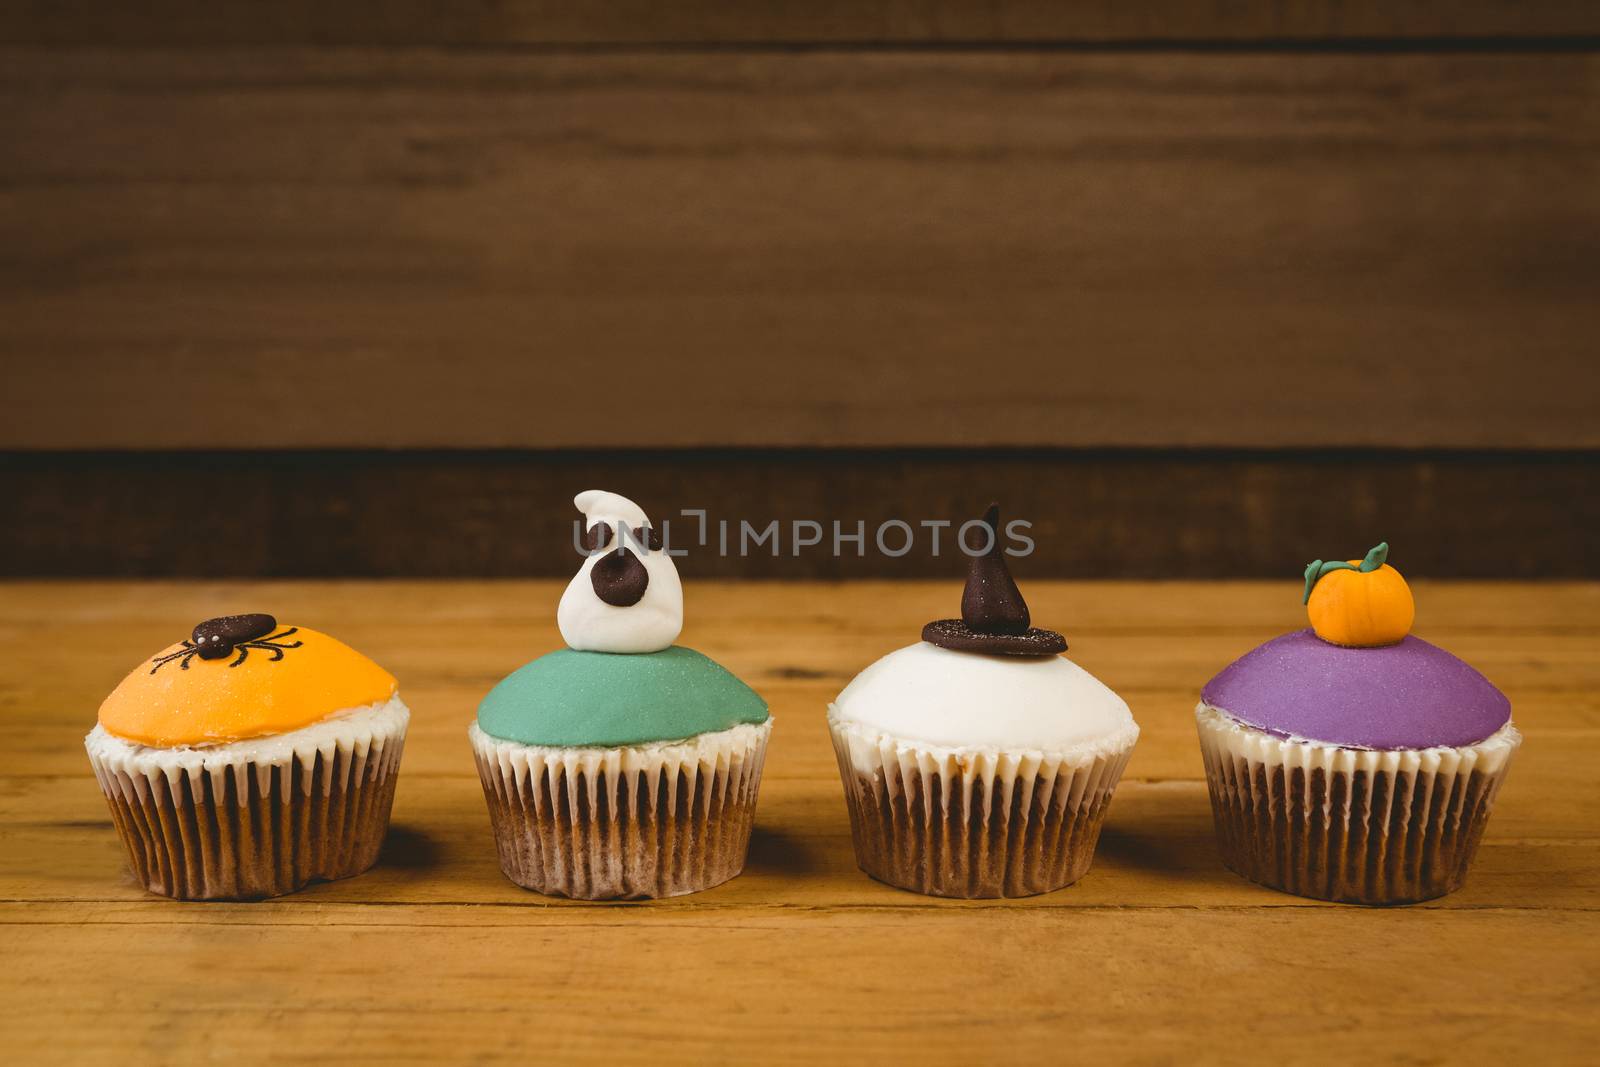 Colorful cup cakes arranged on wooden table during Halloween